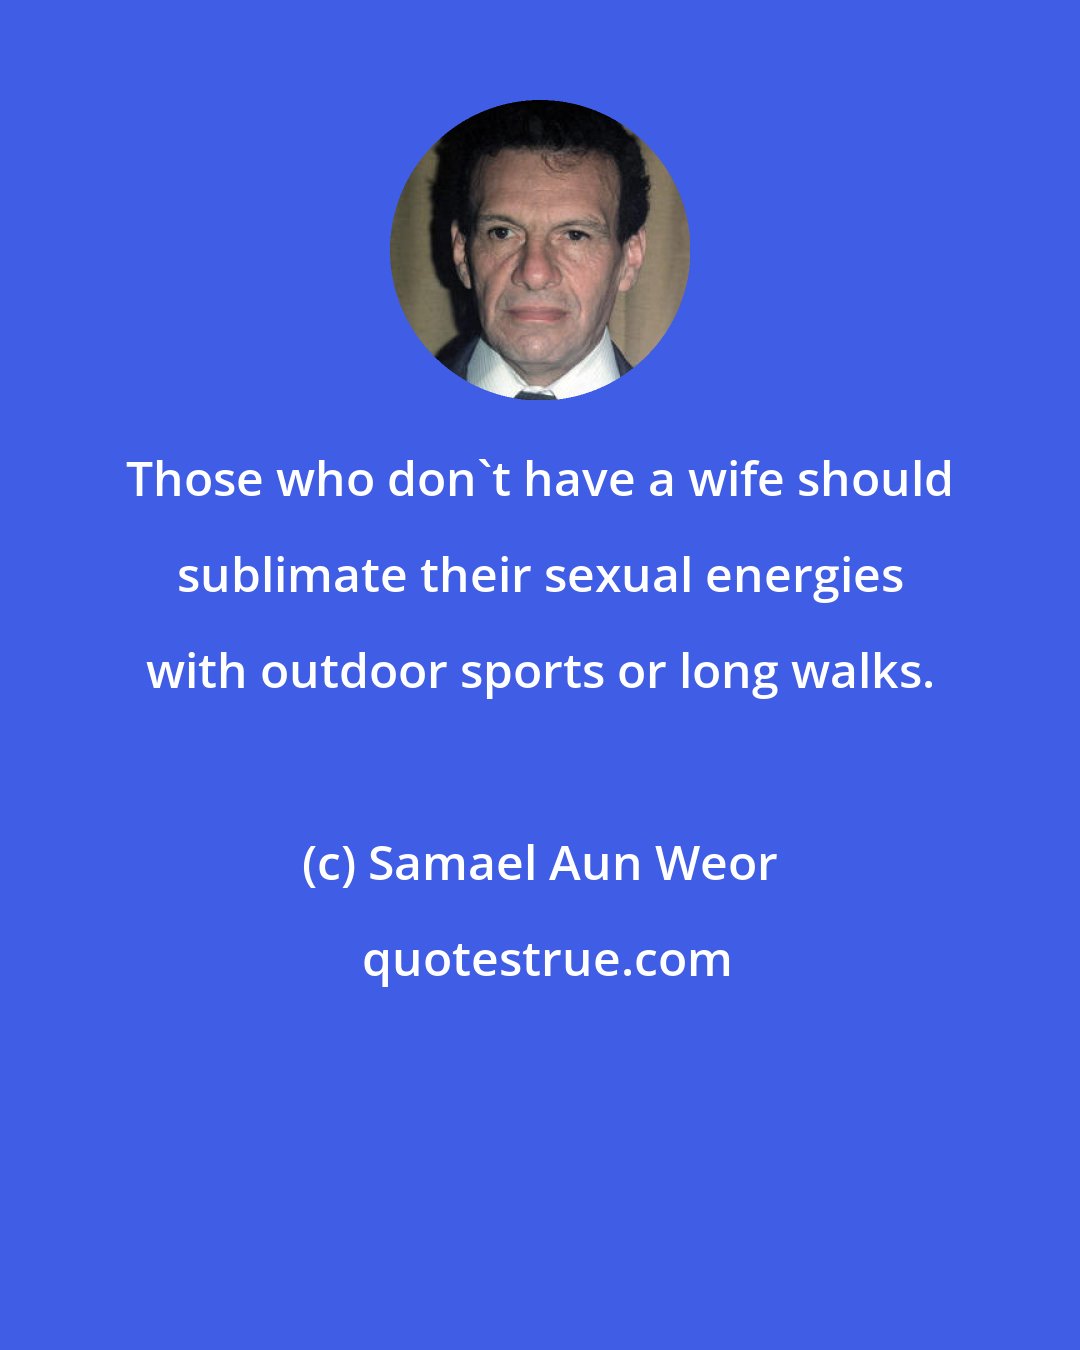 Samael Aun Weor: Those who don't have a wife should sublimate their sexual energies with outdoor sports or long walks.